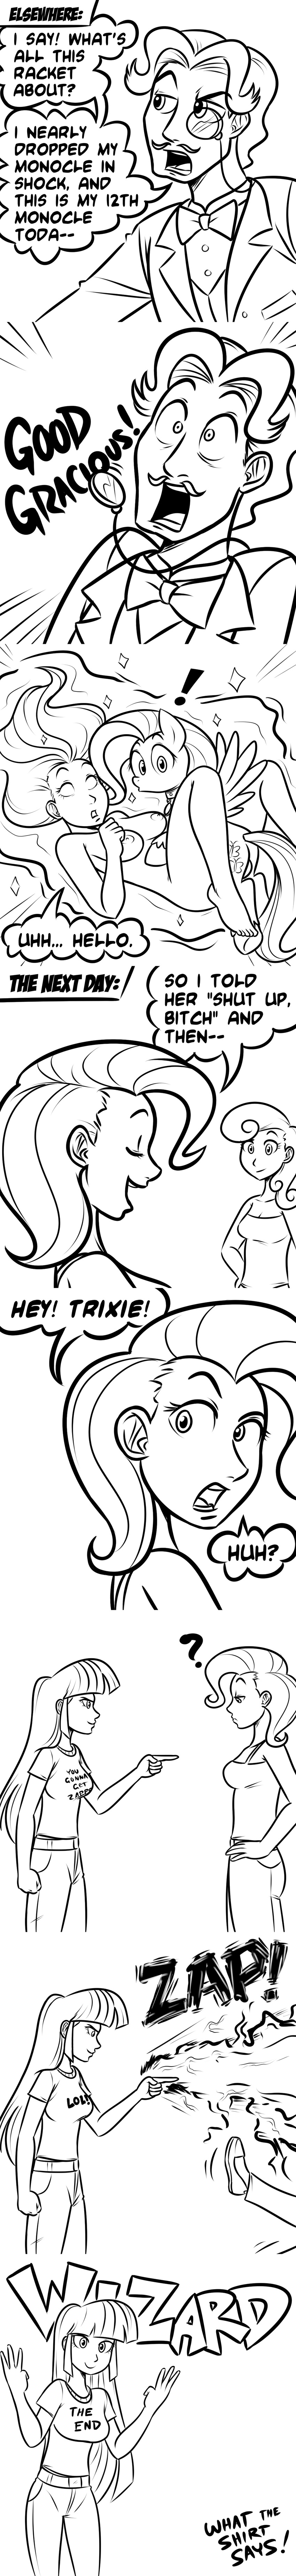 (mlp)megasweet black_and_white blog_comic breasts clothing comic cutie_mark dickgirl english_text equine fancy fancypants_(mlp) female feral fluttershy_(mlp) friendship friendship_is_magic herm herm_on_female hooves horse human humanized intersex interspecies is little magic mammal megasweet monochrome my my_little_pony pants pegasus pony sex sparkle text trixie_(mlp) twilight twilight_sparkle_(mlp) wings